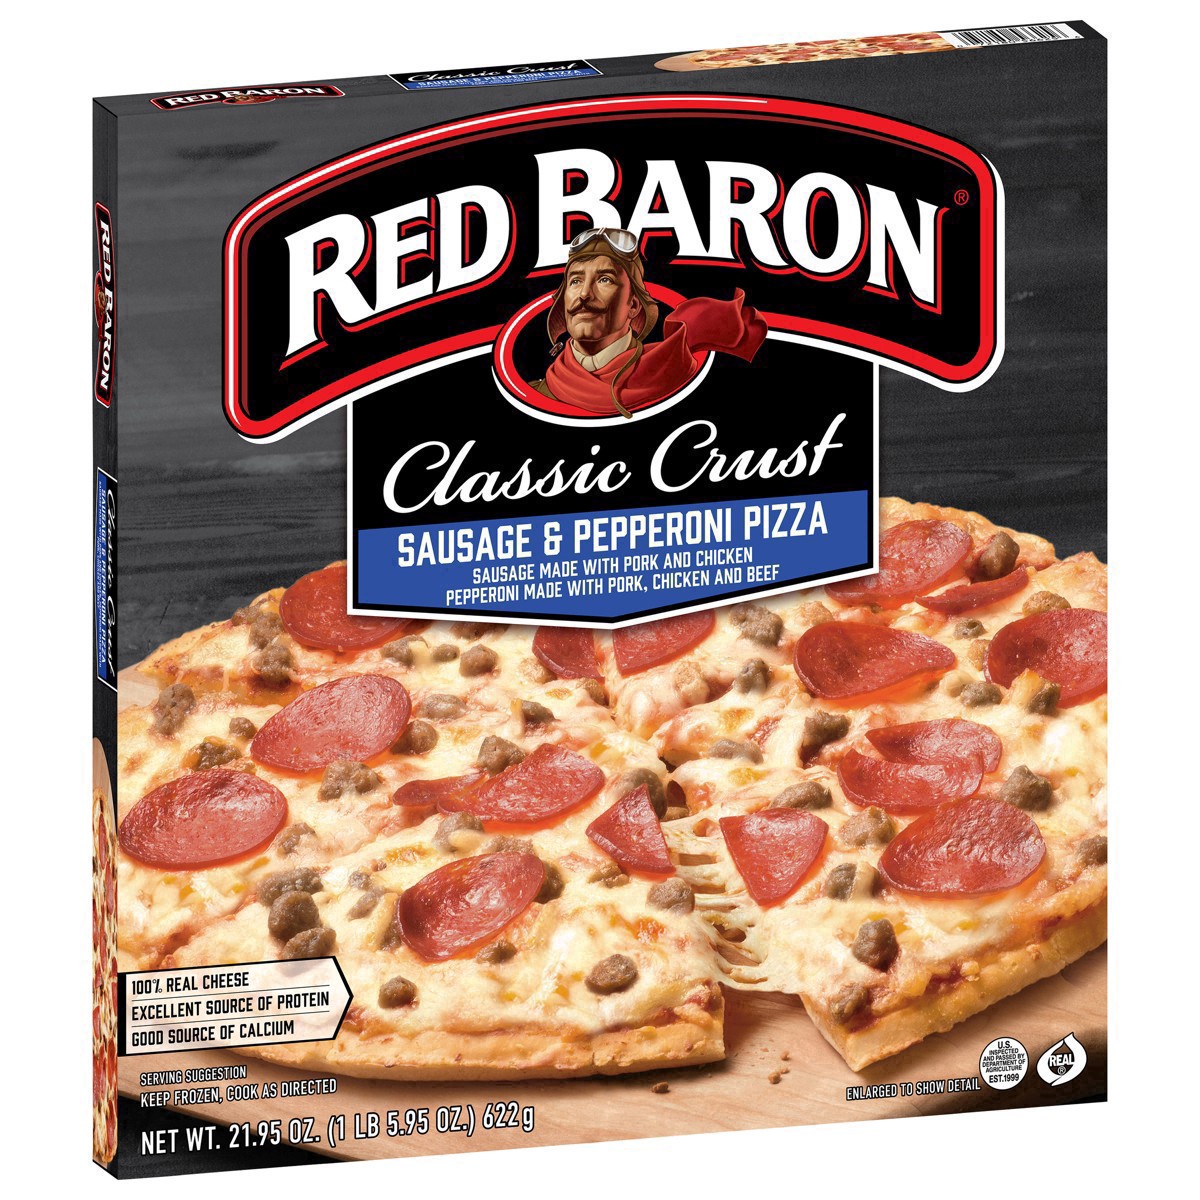 slide 3 of 49, Red Baron Frozen Pizza Classic Crust Sausage & Pepperoni, 21.95 oz